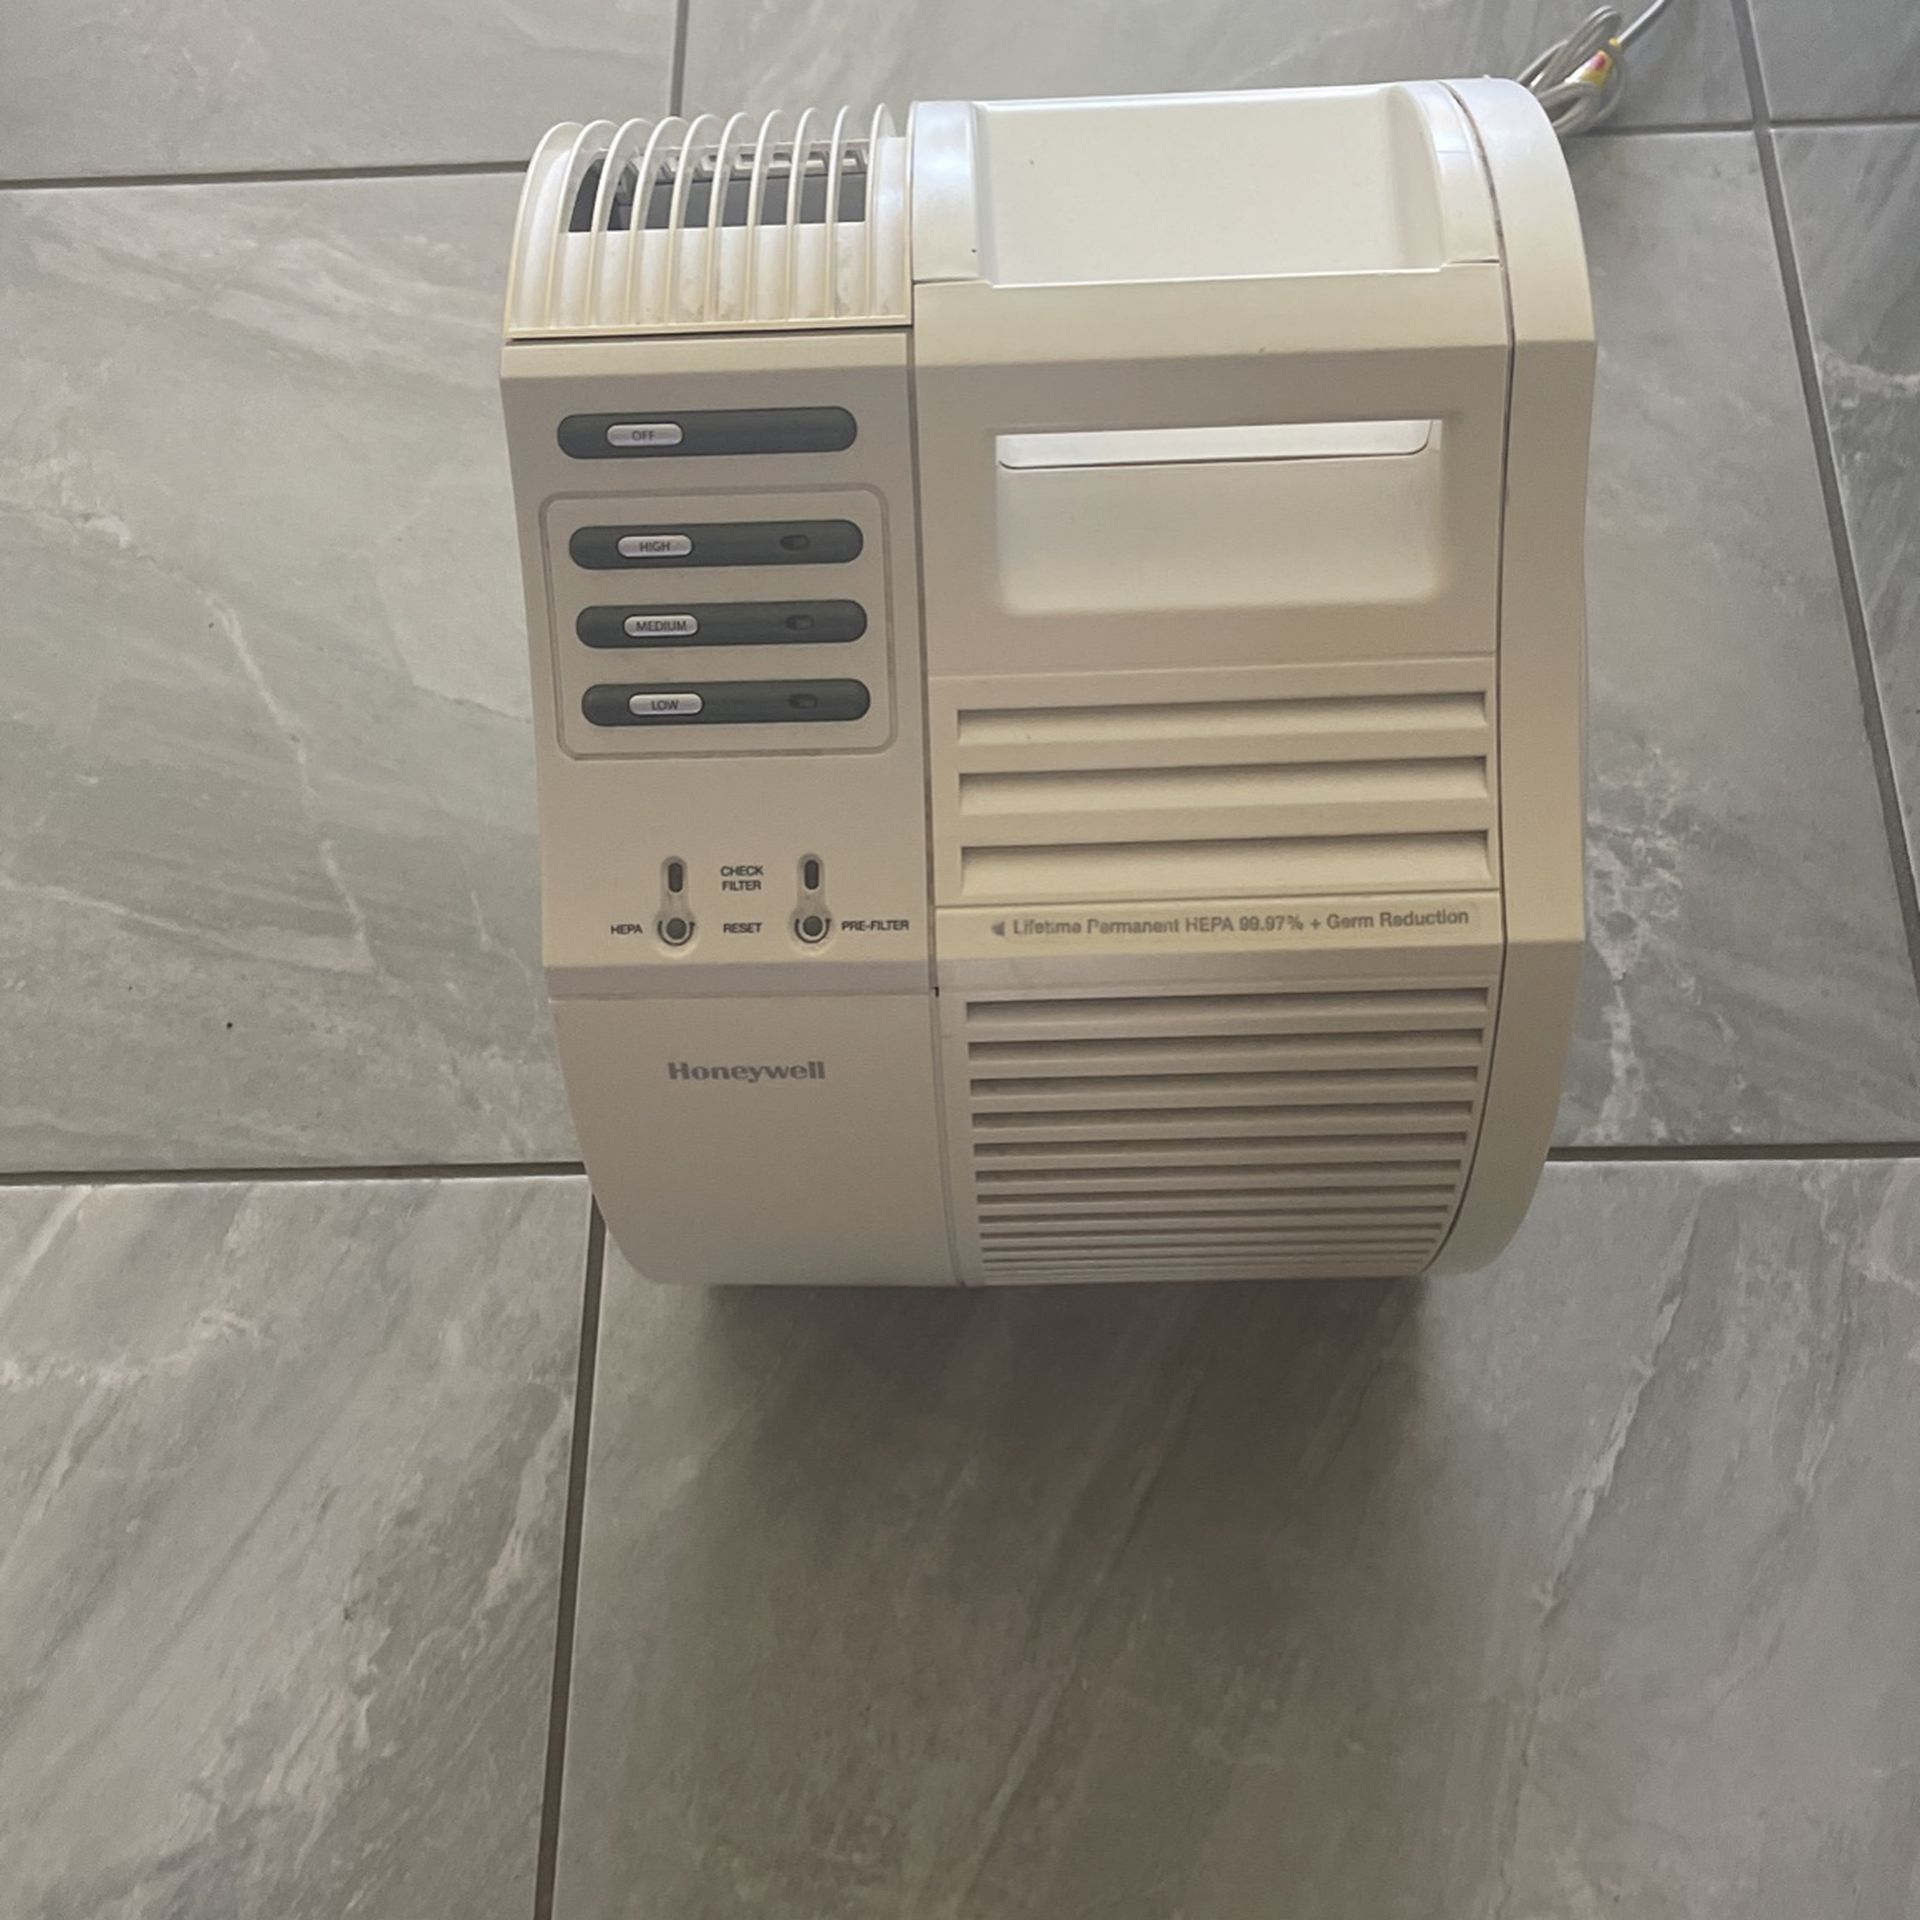 Honeywell 17000 Quietcare Hepa 99.97% Air Cleaner Purifier Great Condition Condition